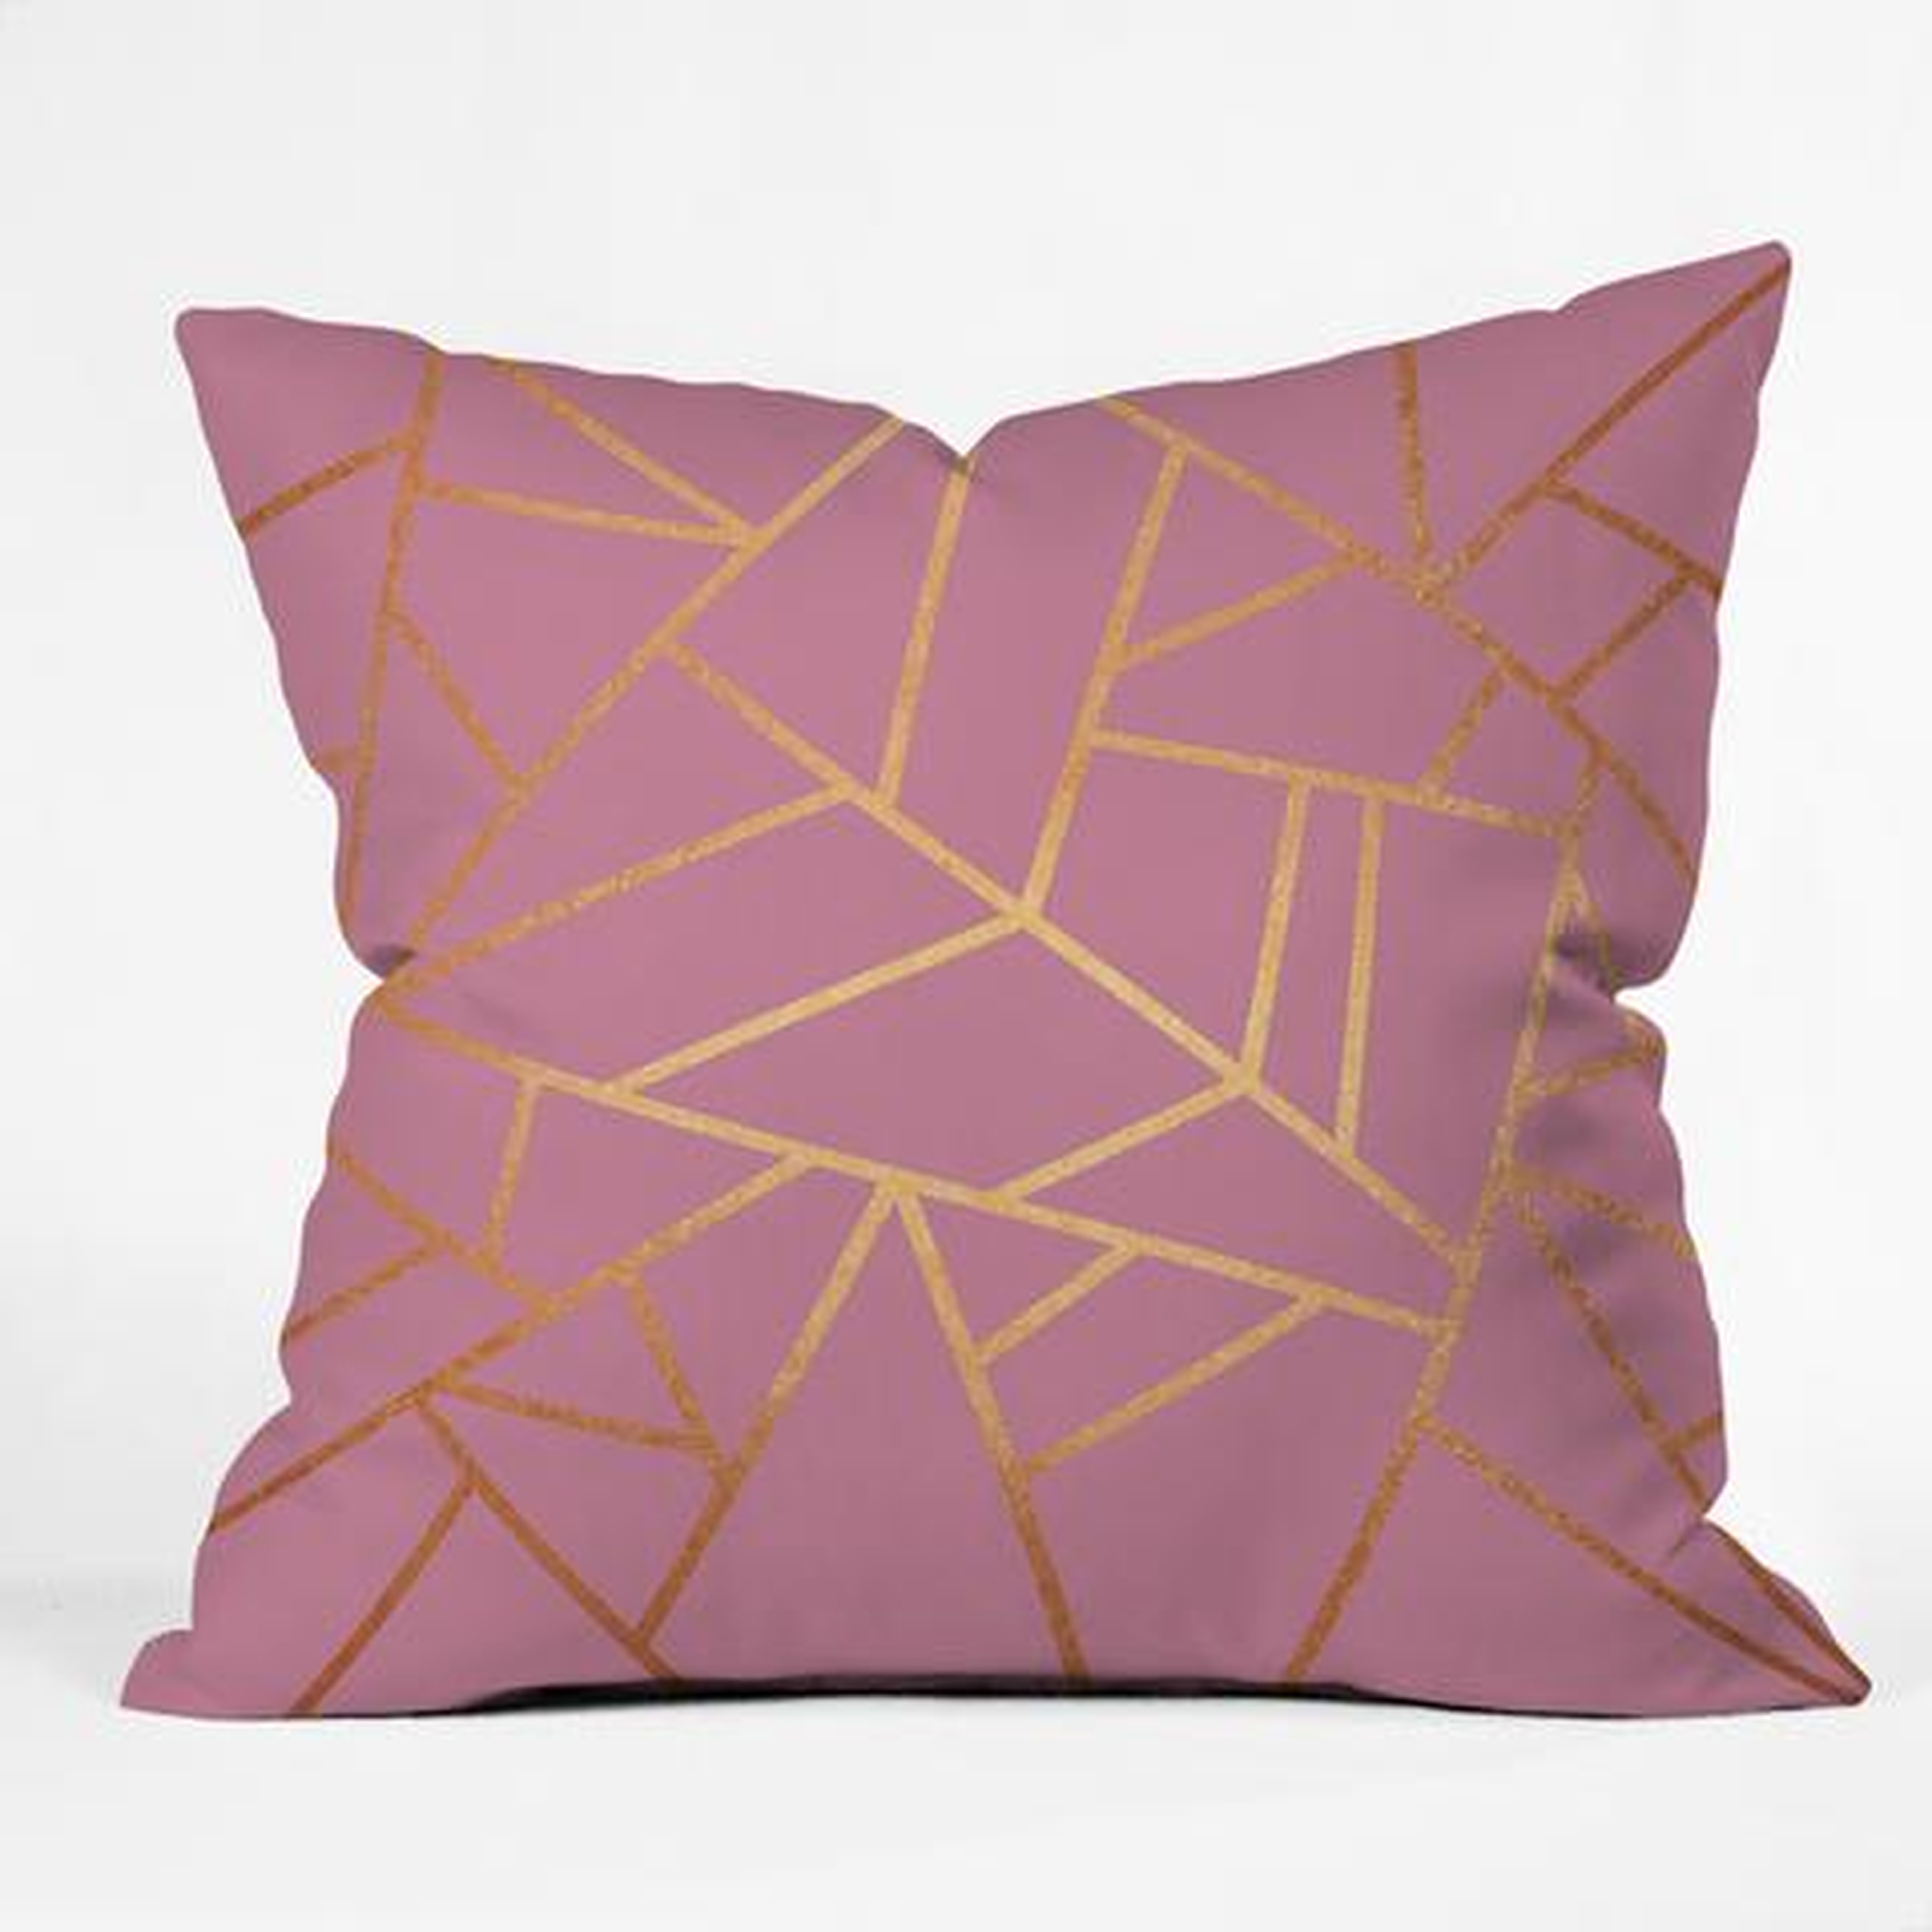 COPPER AND PINK Throw Pillow - 18" x 18" - Polyester fill insert - Wander Print Co.